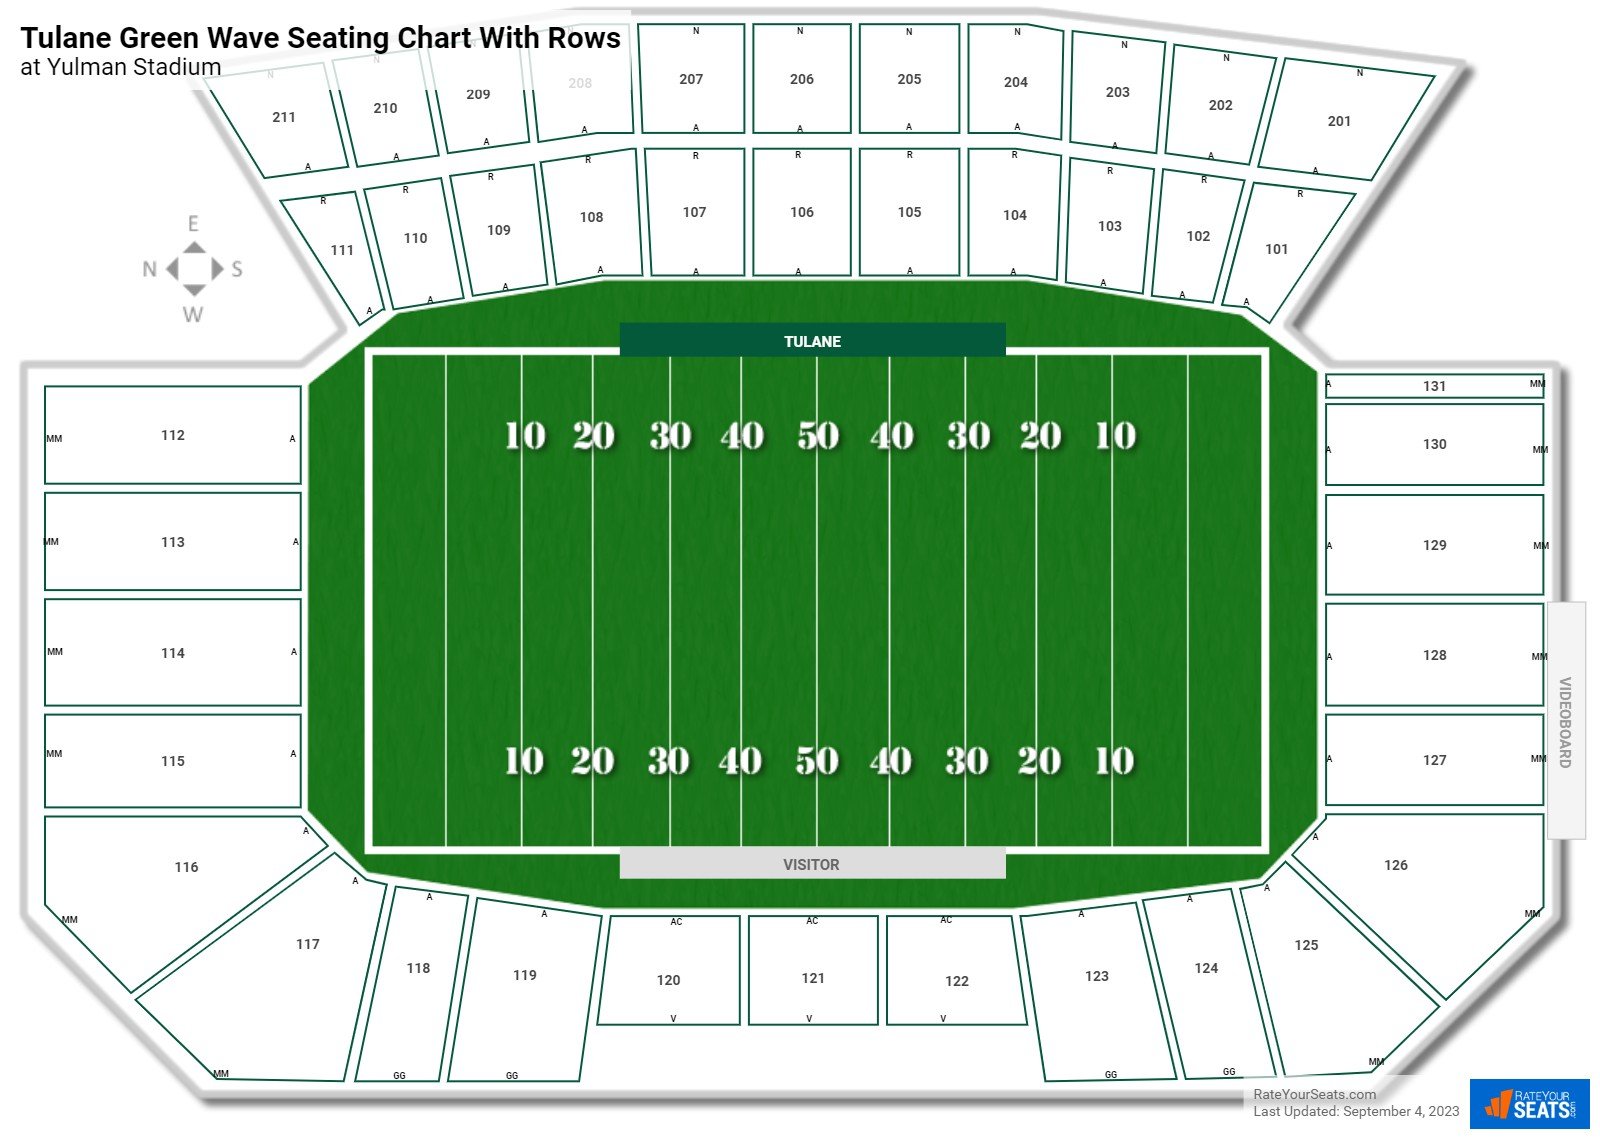 Yulman Stadium seating chart with row numbers